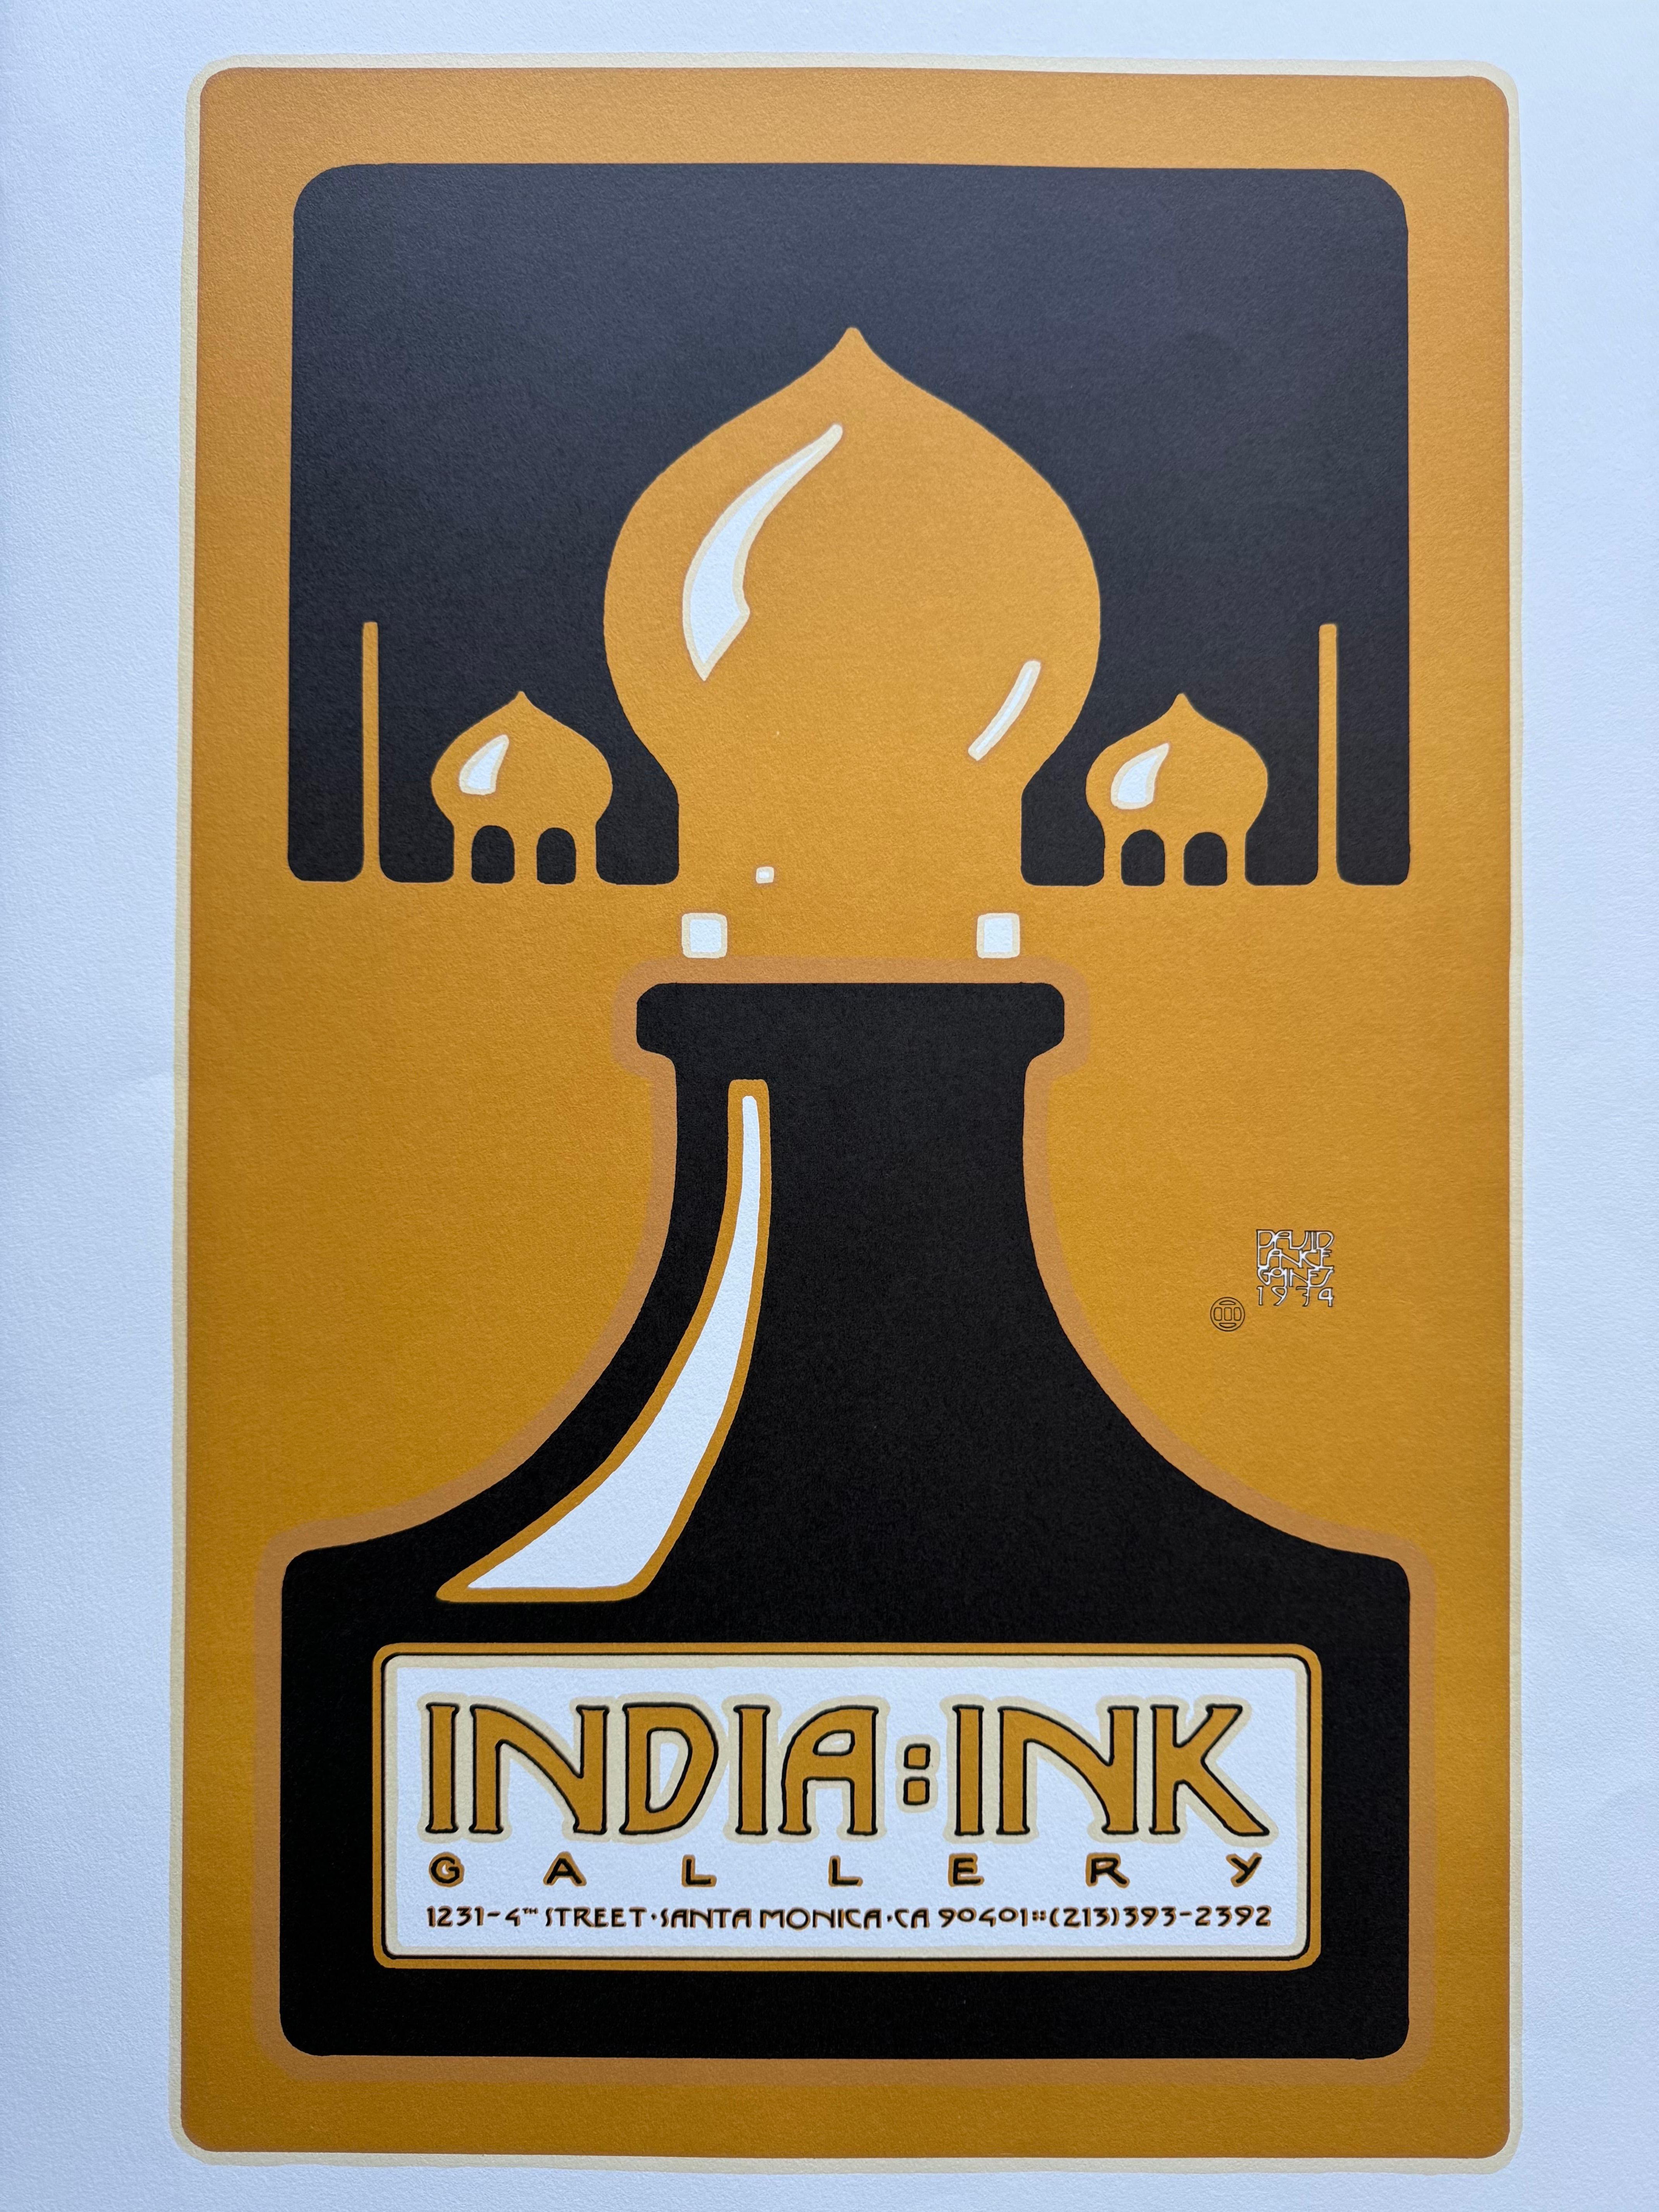 Beautiful David Lance Goines print for India Ink Gallery in Los Angeles. This is the 2nd edition, printed on heavy stock in 1974. 

This print is in great condition, see pictures for